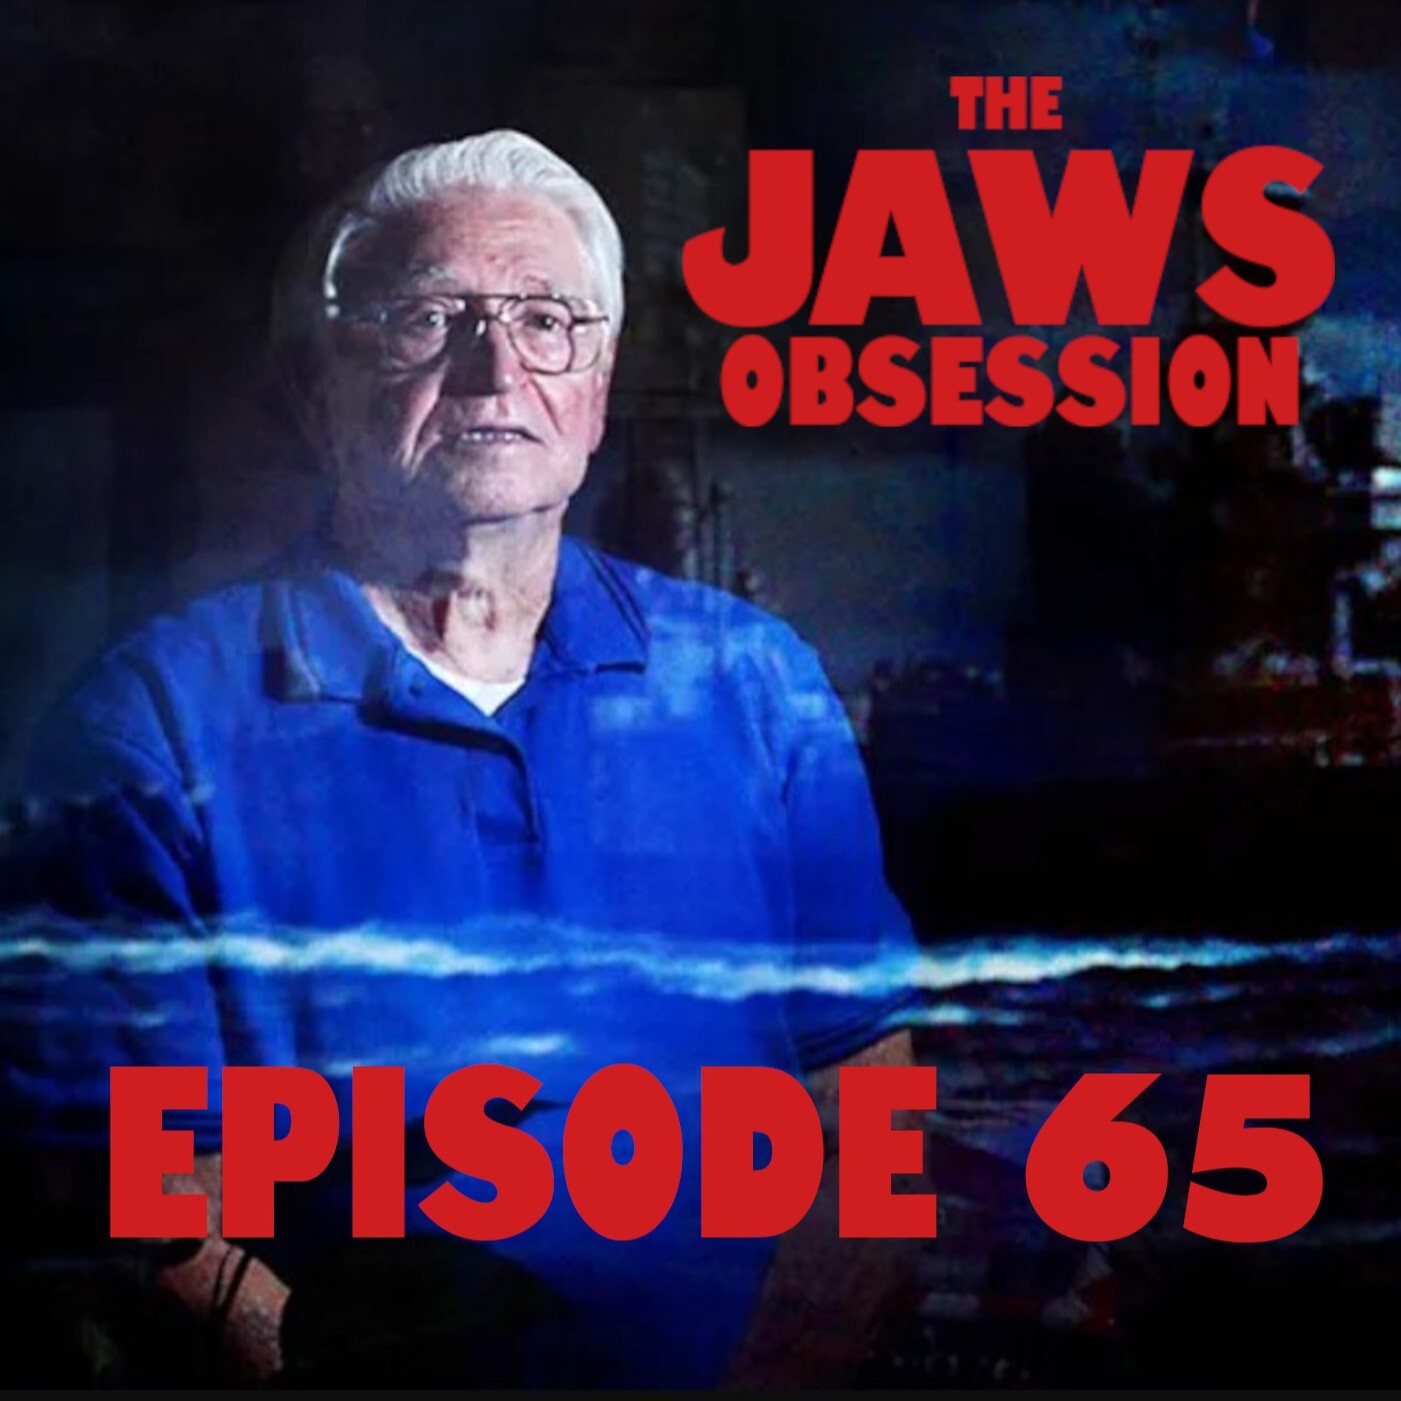 The Jaws Obsession Episode 65: A Bridge to History